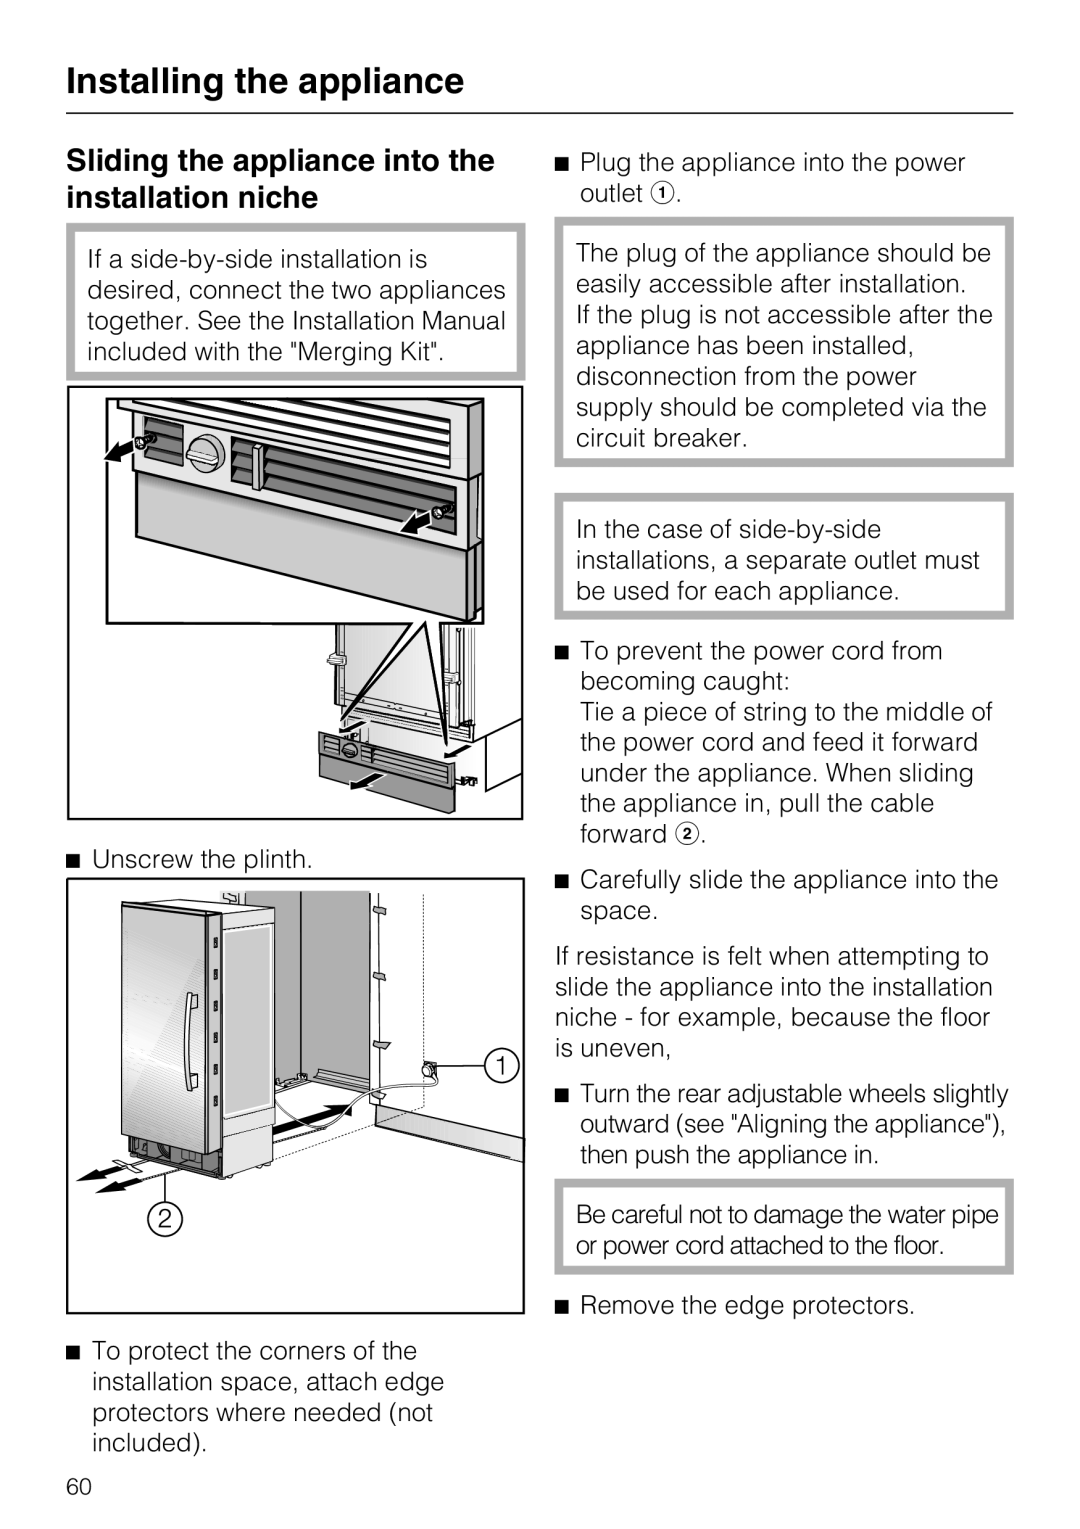 Miele F 1411 SF installation instructions Sliding the appliance into the installation niche, Installing the appliance 